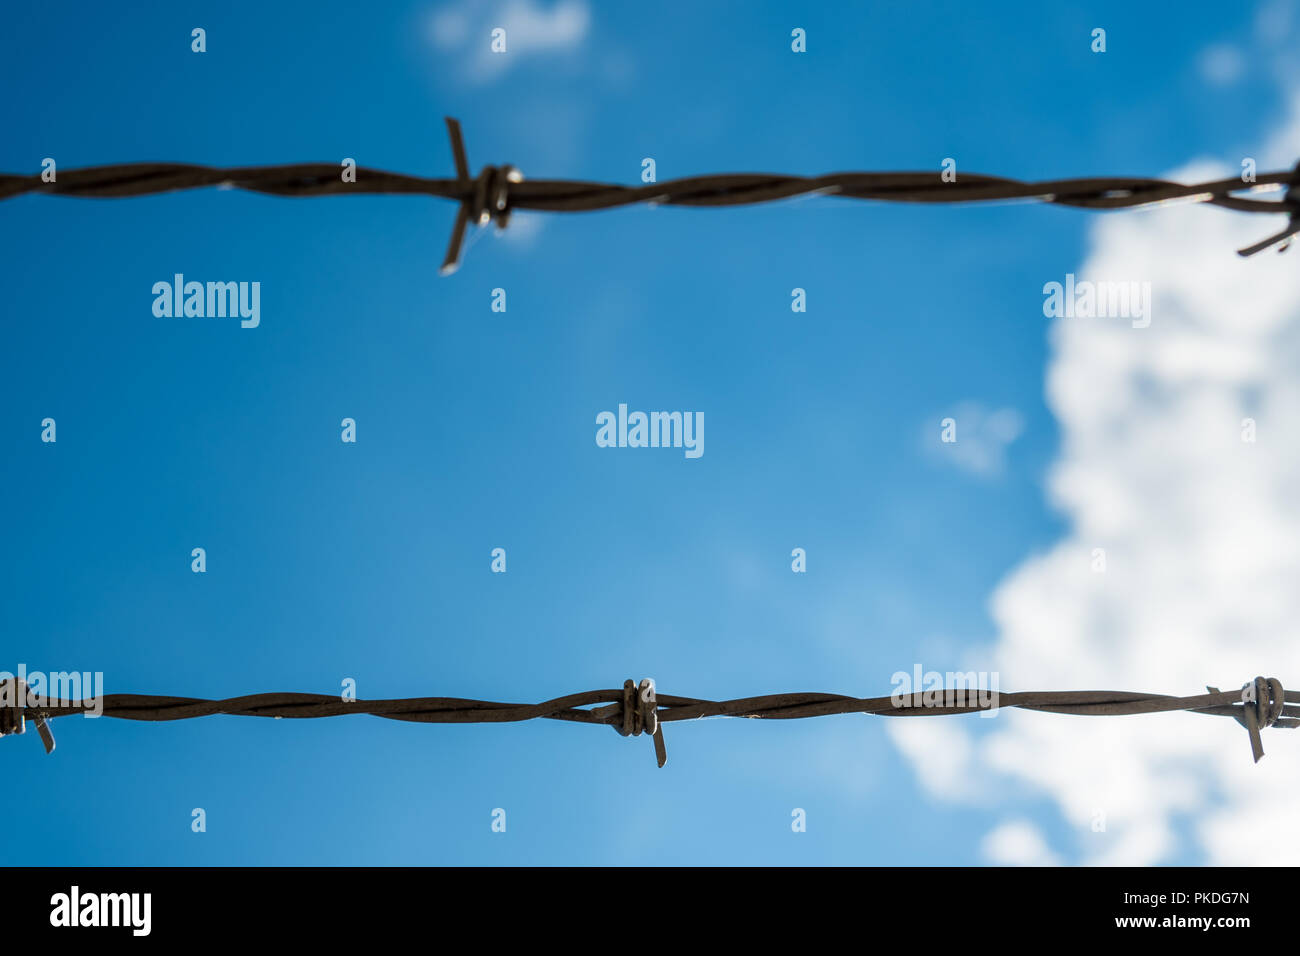 Two strands of barbed wire with blue sky and clouds in the background Stock Photo